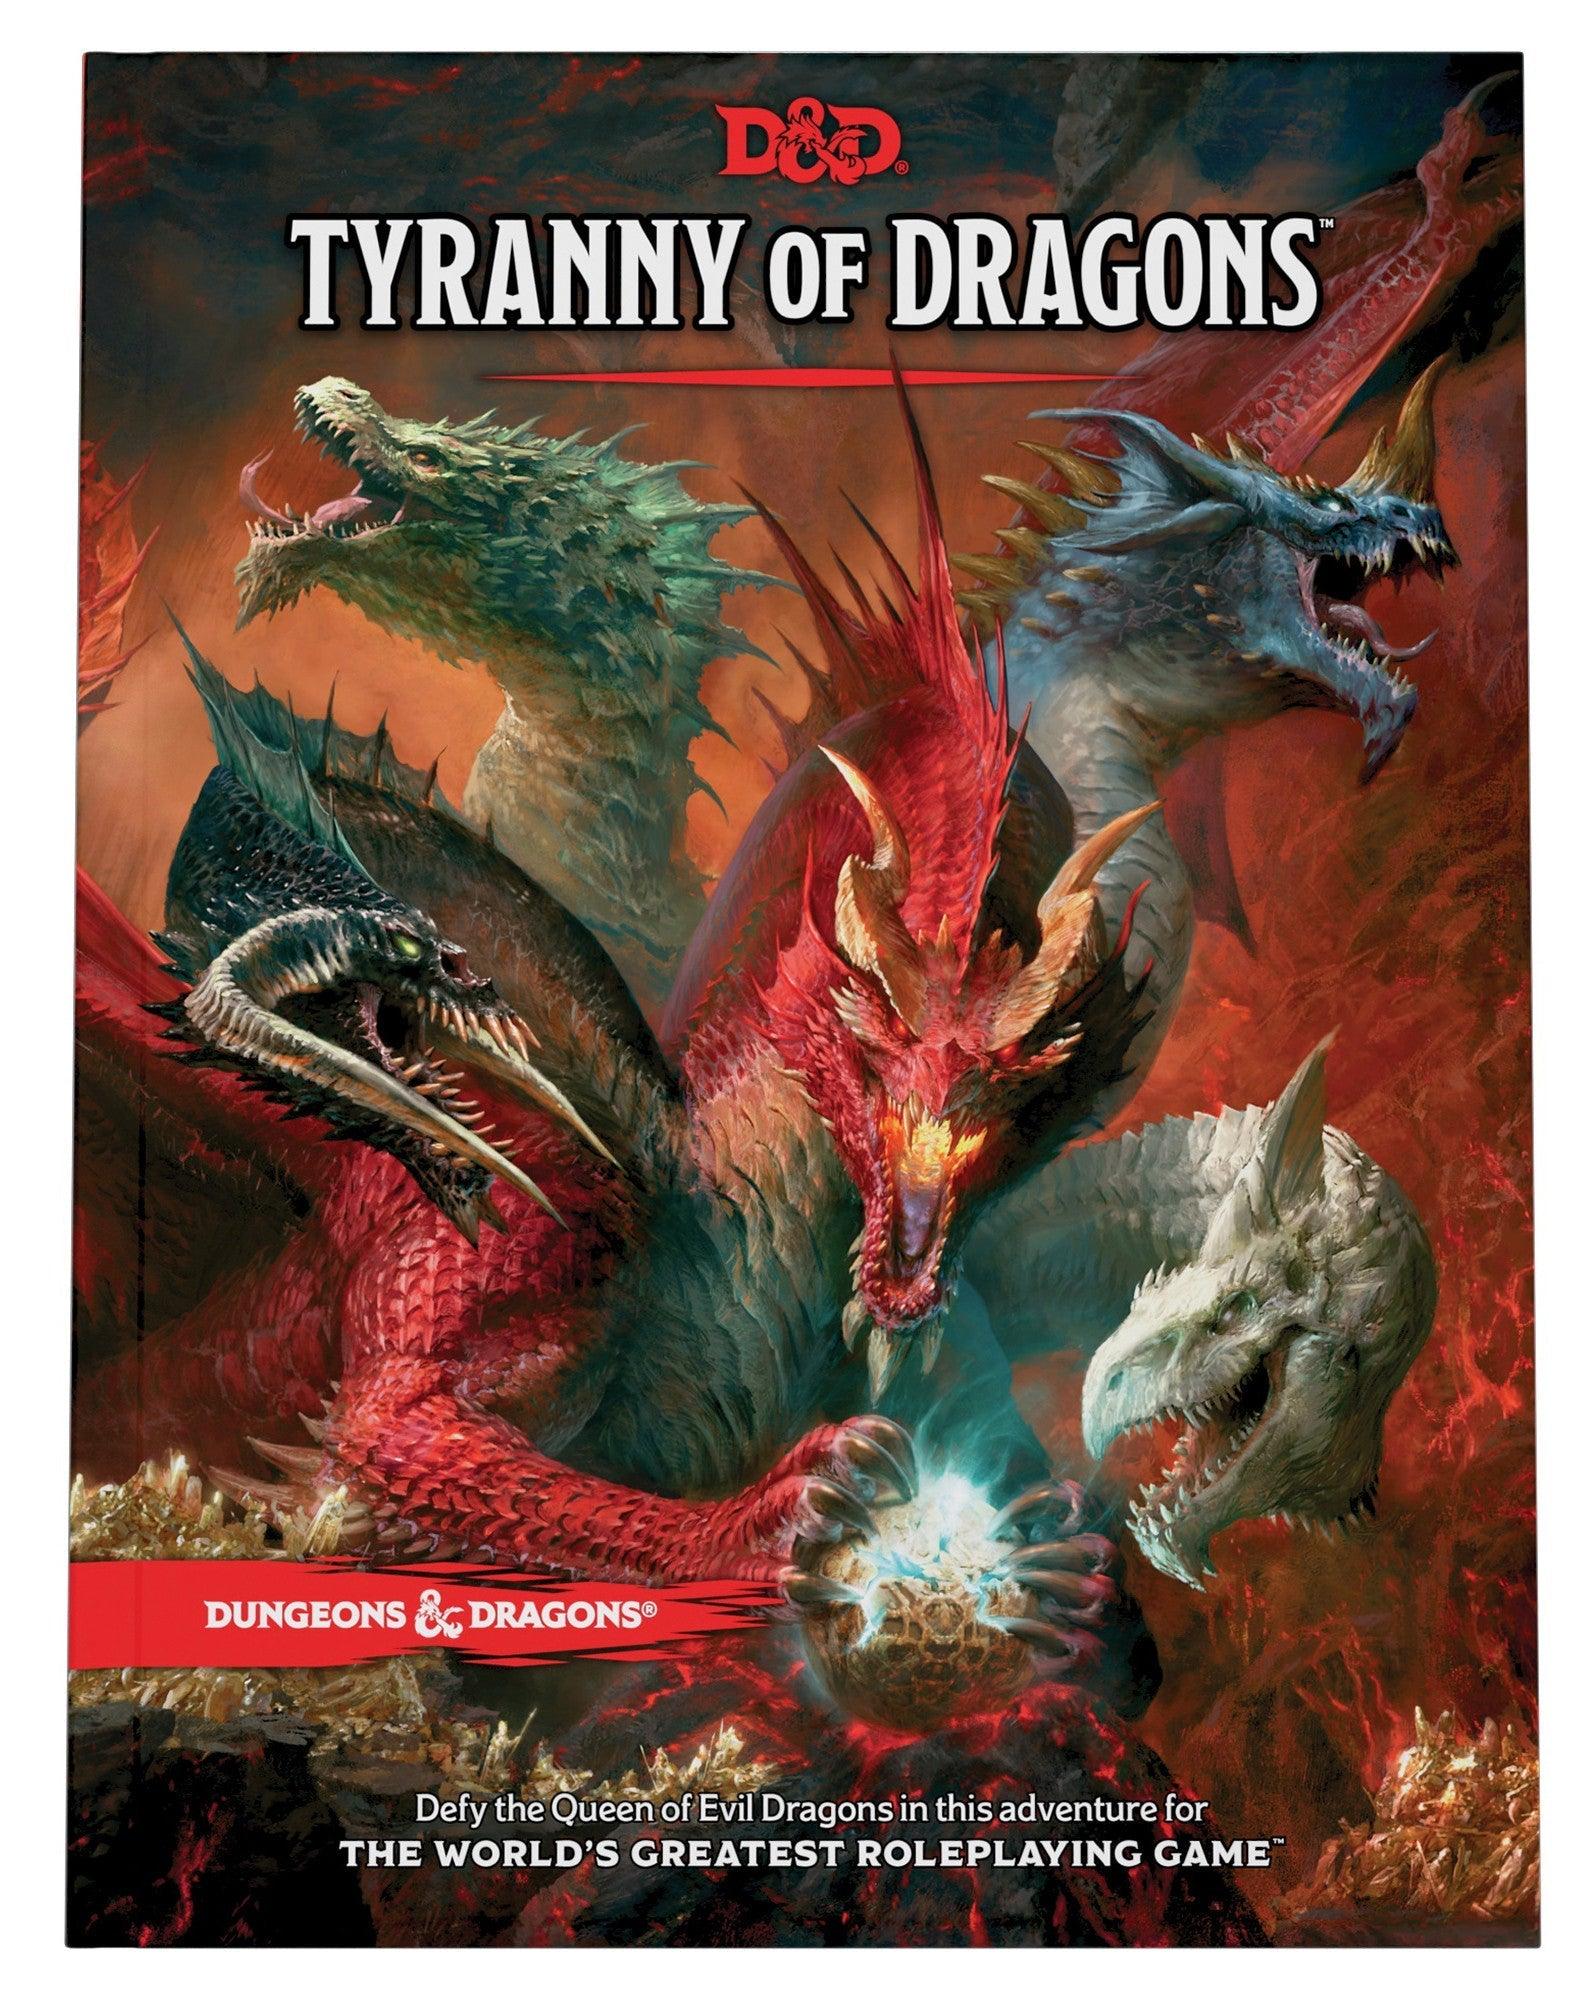 VR-96766 D&D Dungeons & Dragons Tyranny of Dragons Hardcover - Wizards of the Coast - Titan Pop Culture